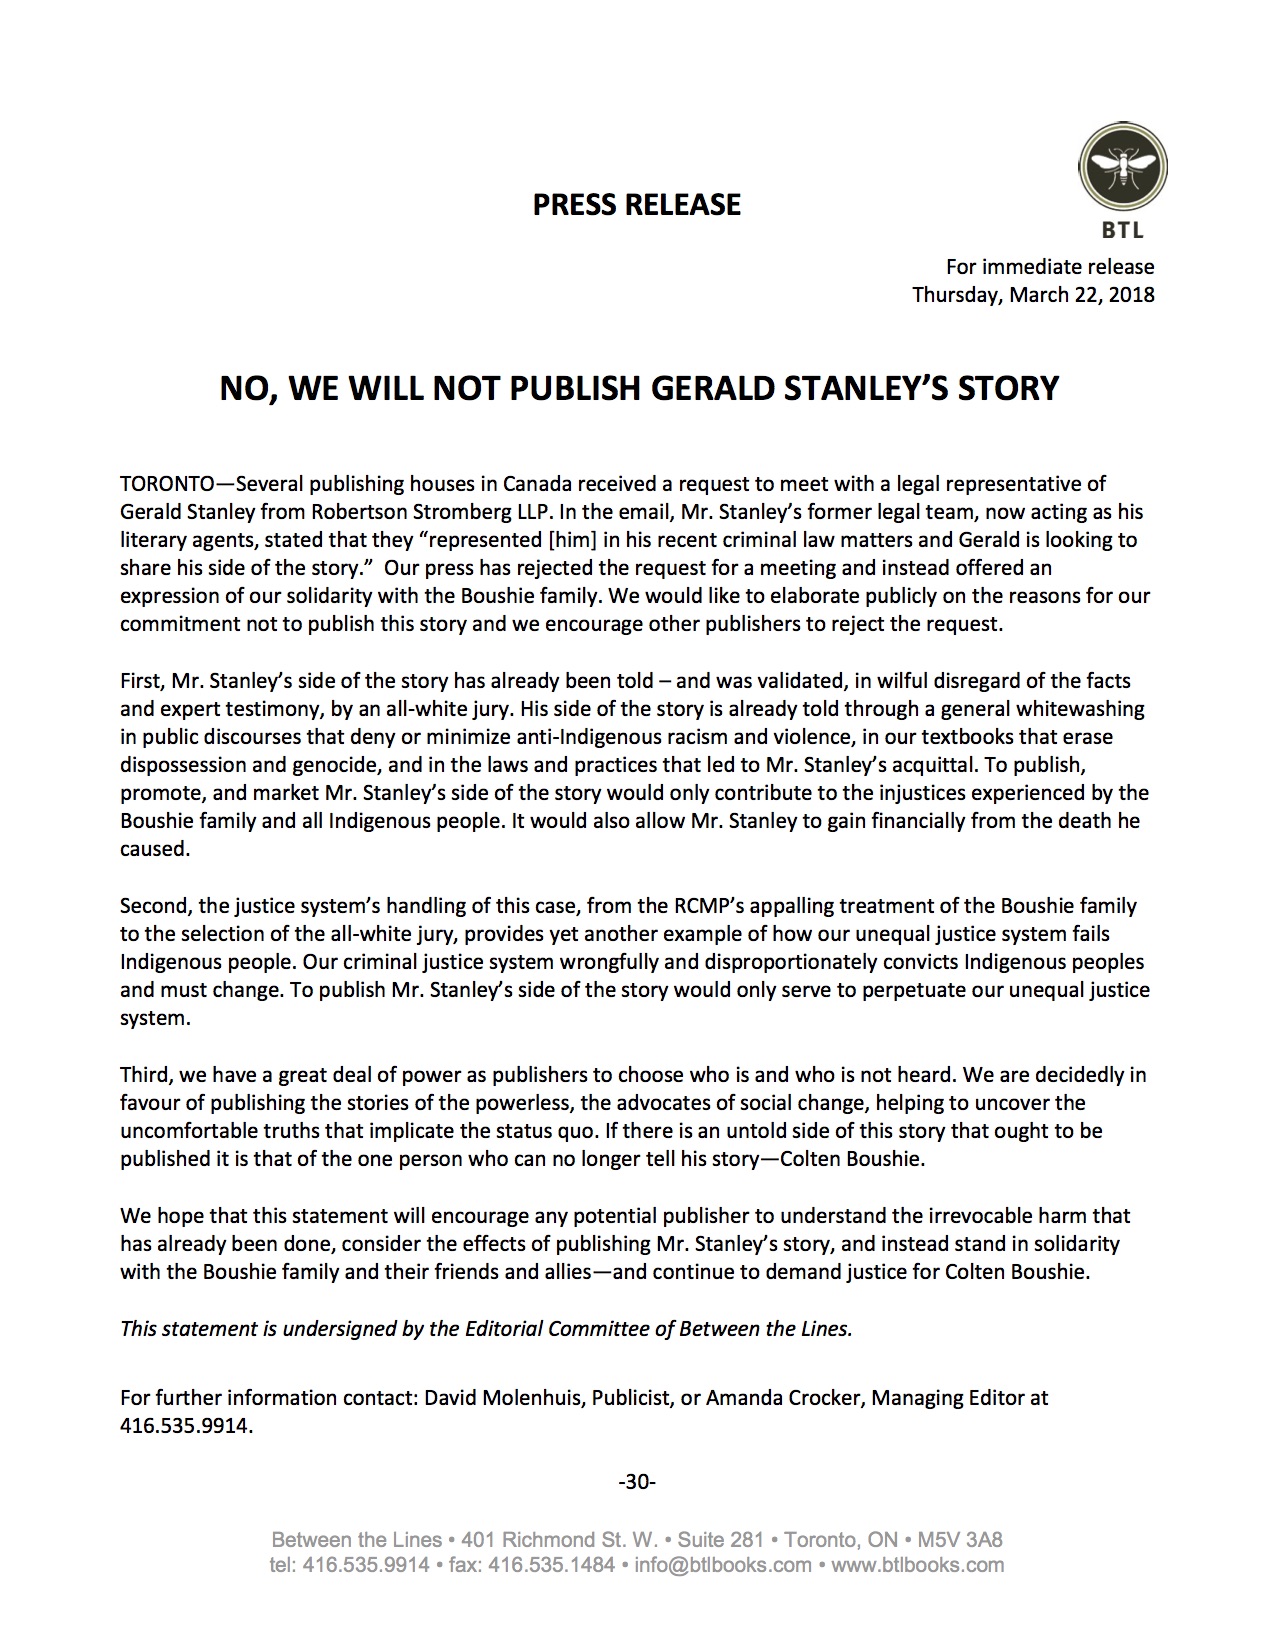 2018.03.22-Press Release-No We Will Not Publish Gerald Stanley's Story